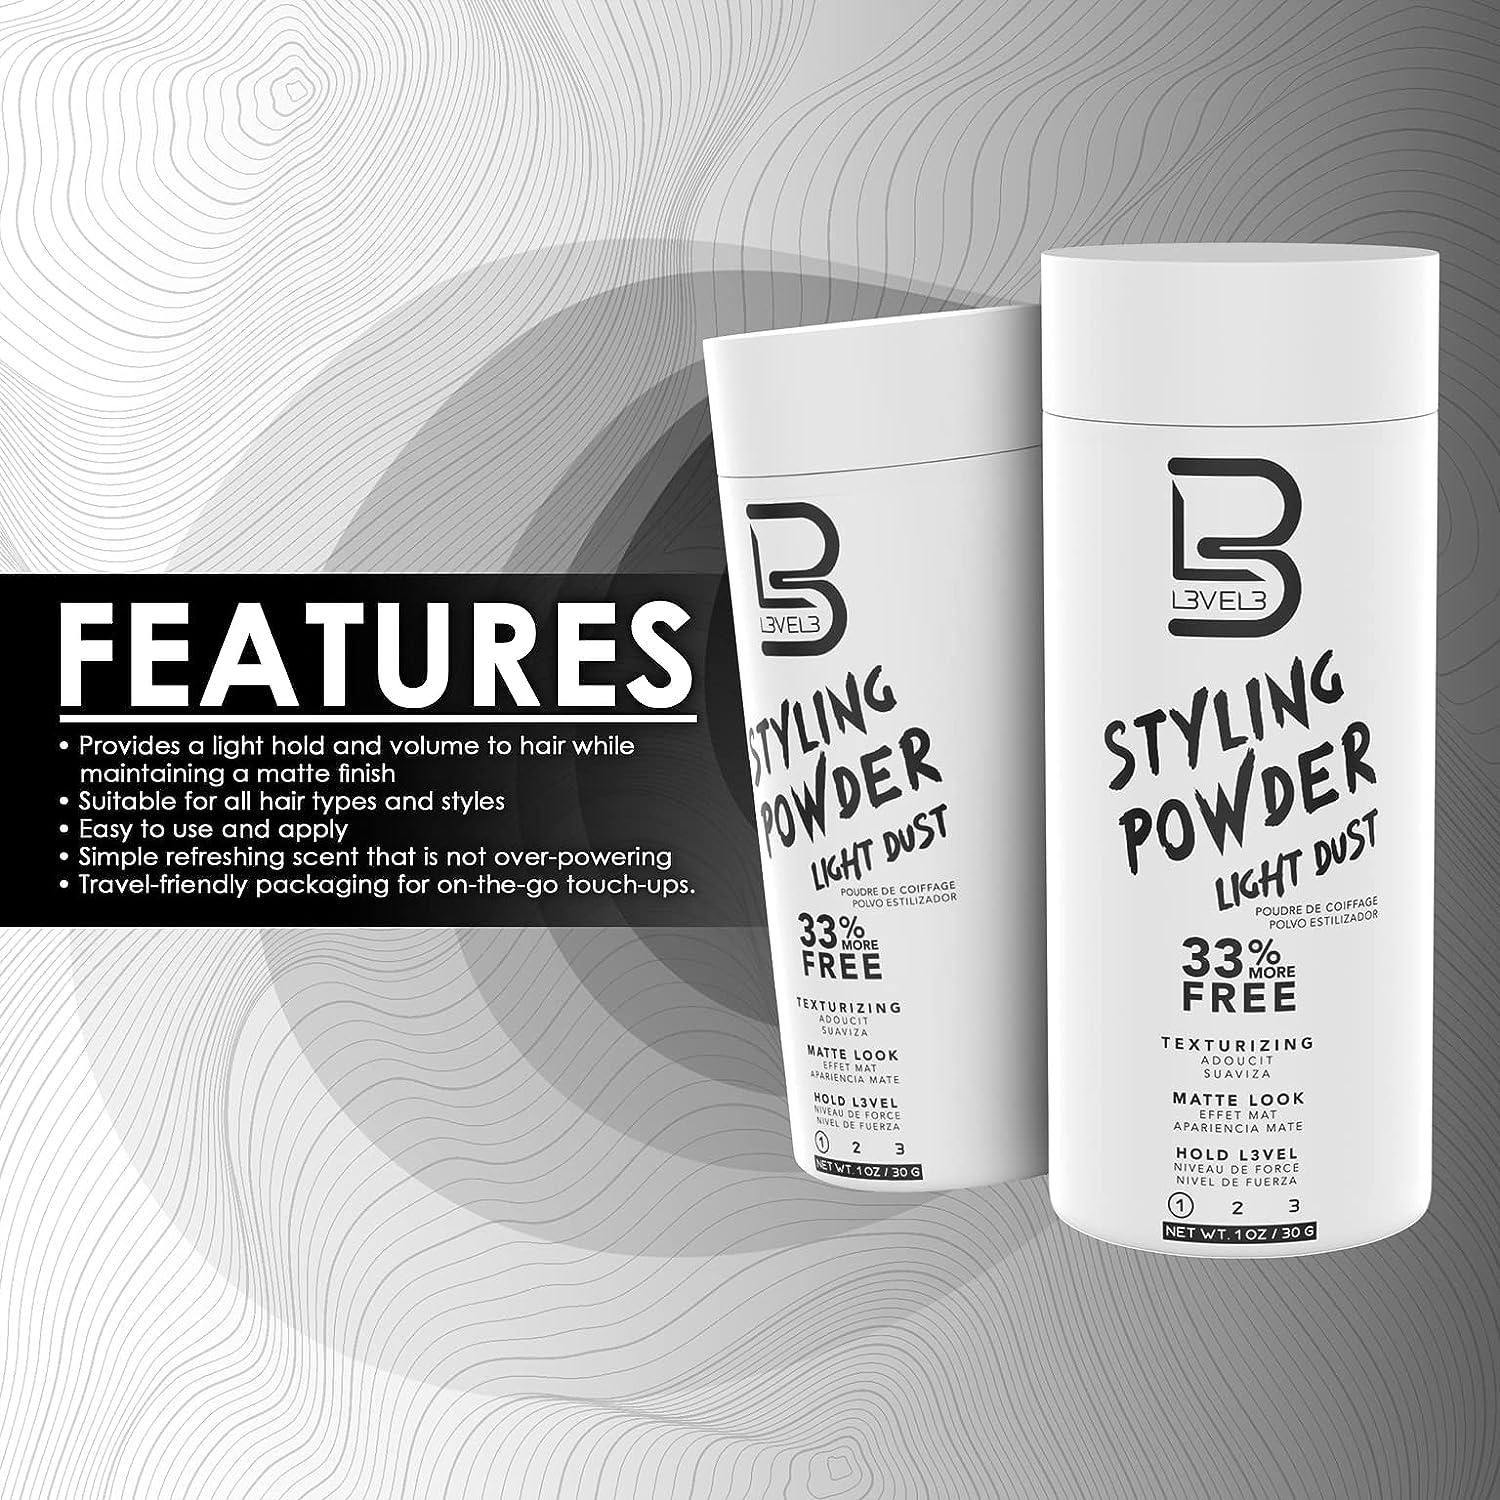 L3 Level 3 Travel Styling Powder - Small 0.18 oz for Travel - Natural Look  Mens Powder - Sample Styling Powder (Light Hold-12Pack)